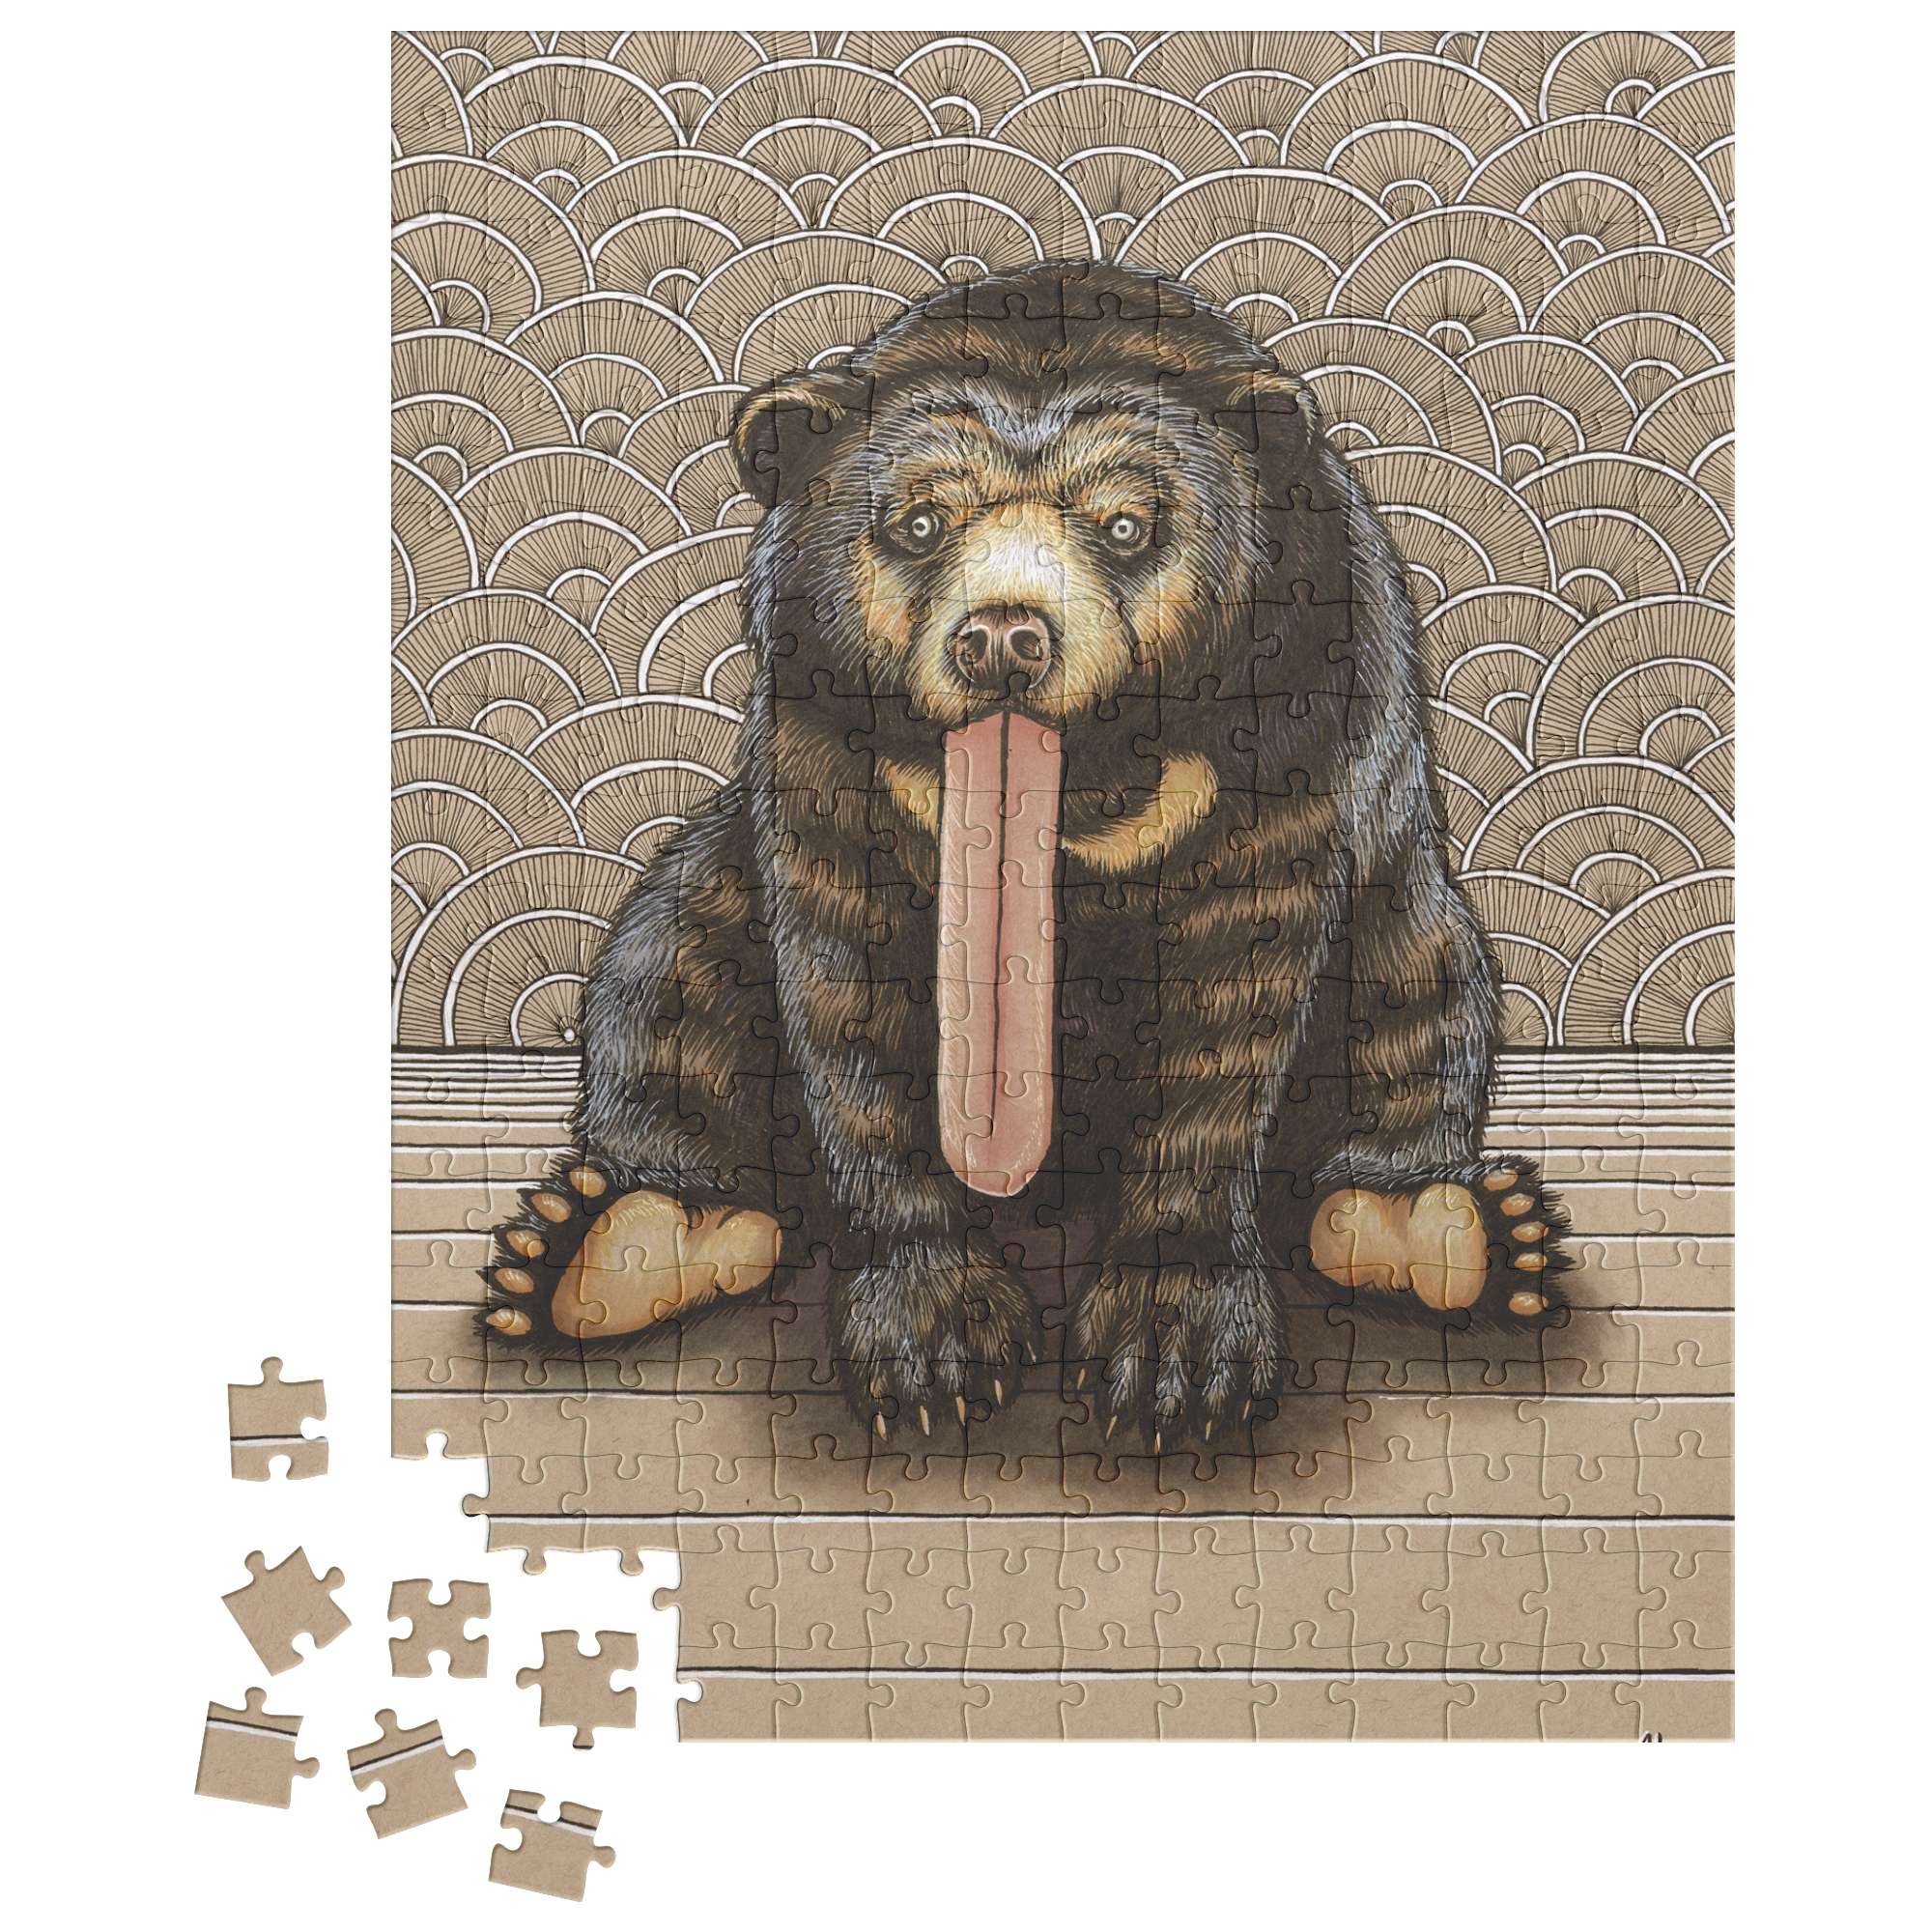 A Sun Bear Puzzle partially assembled, depicting an illustration of a sun bear sitting with its tongue out, against a patterned background.